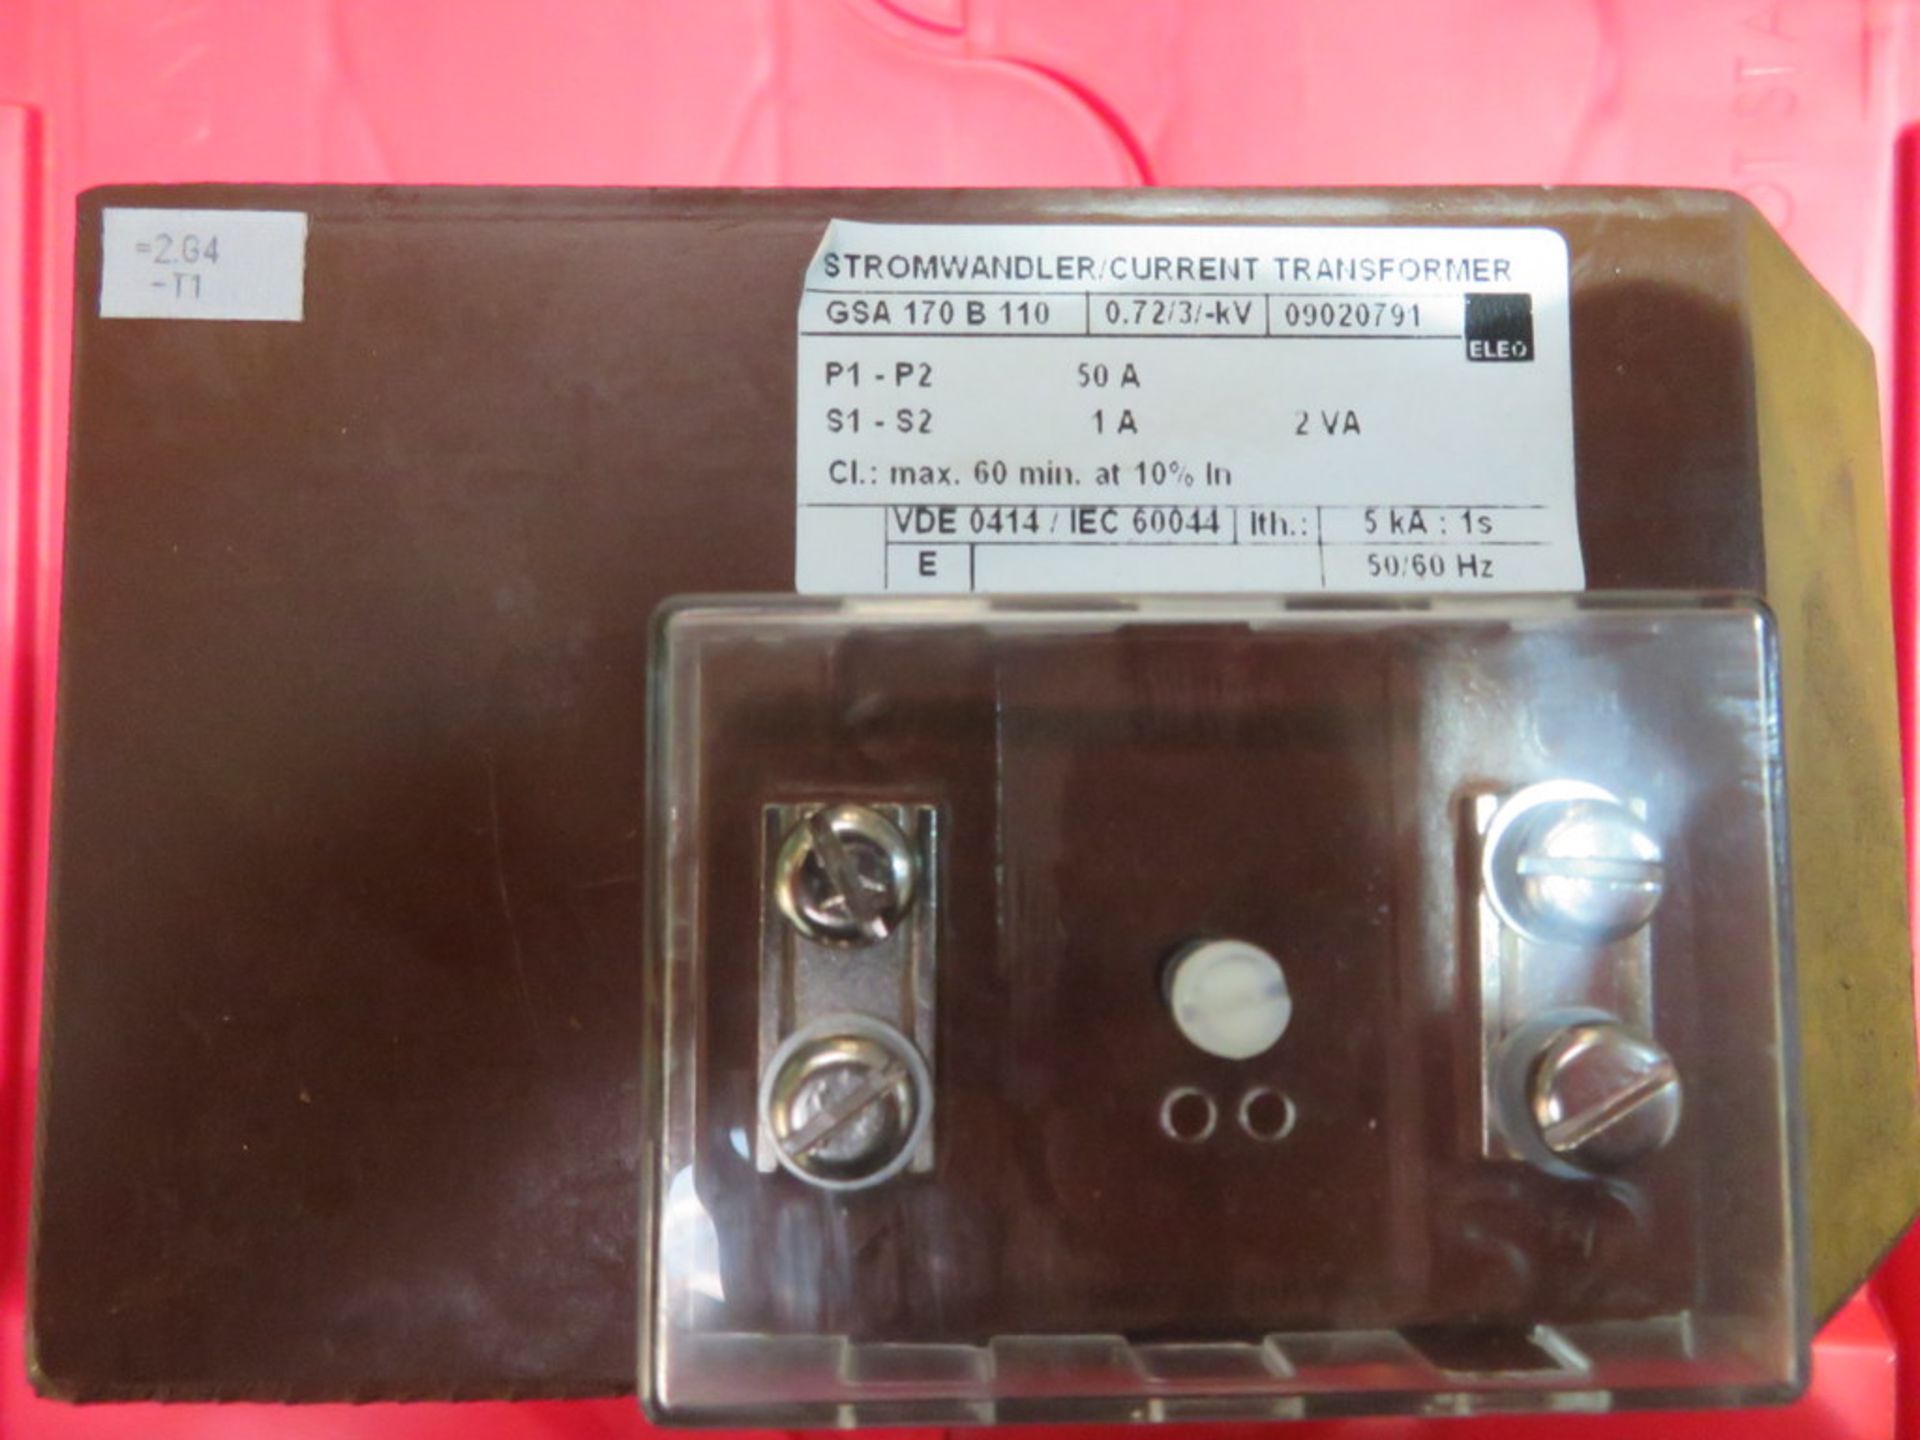 8 X STROMWANDLER 0.72/3/-KW CURRENT TRANSFORMERS - Image 3 of 3